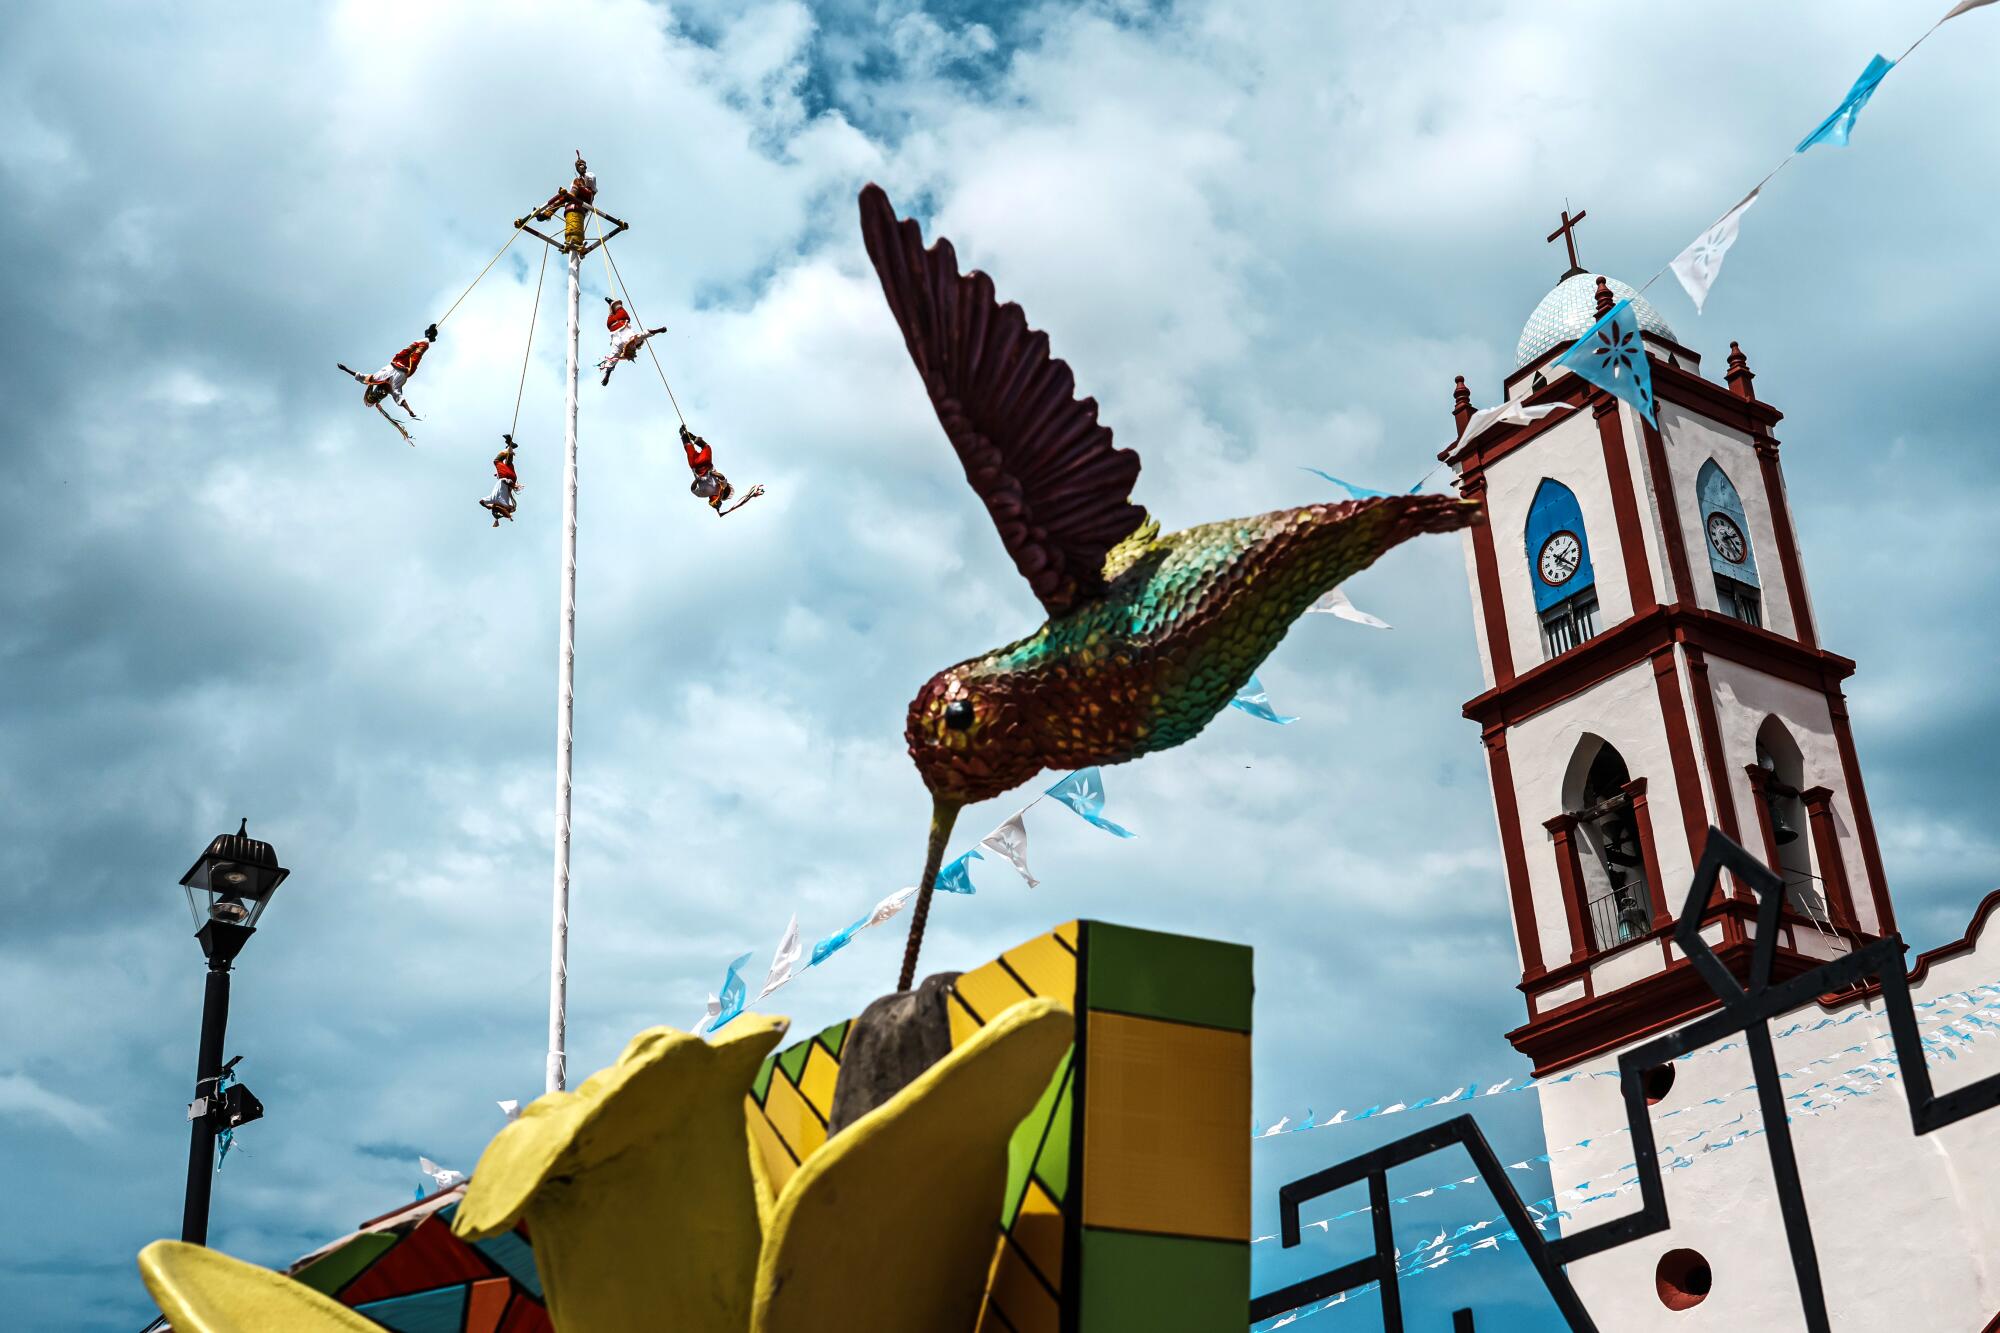 Voladores fly off a metal pole as they perform to a tourist crowd lingering outside the church in Papantla, Mexico